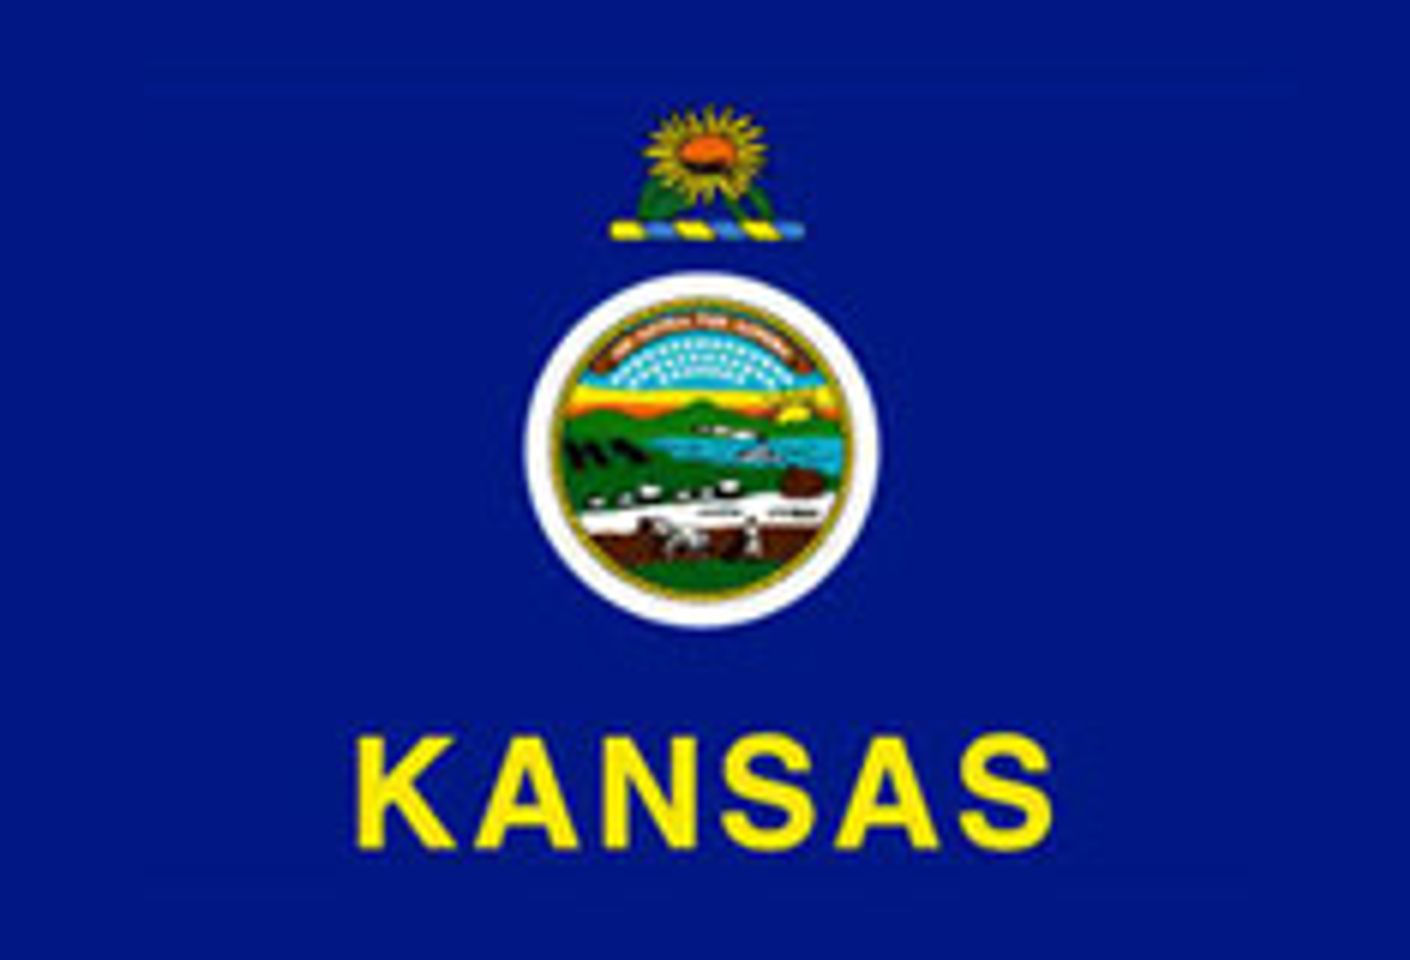 Kansas Makes Additions to Sex Education Policy